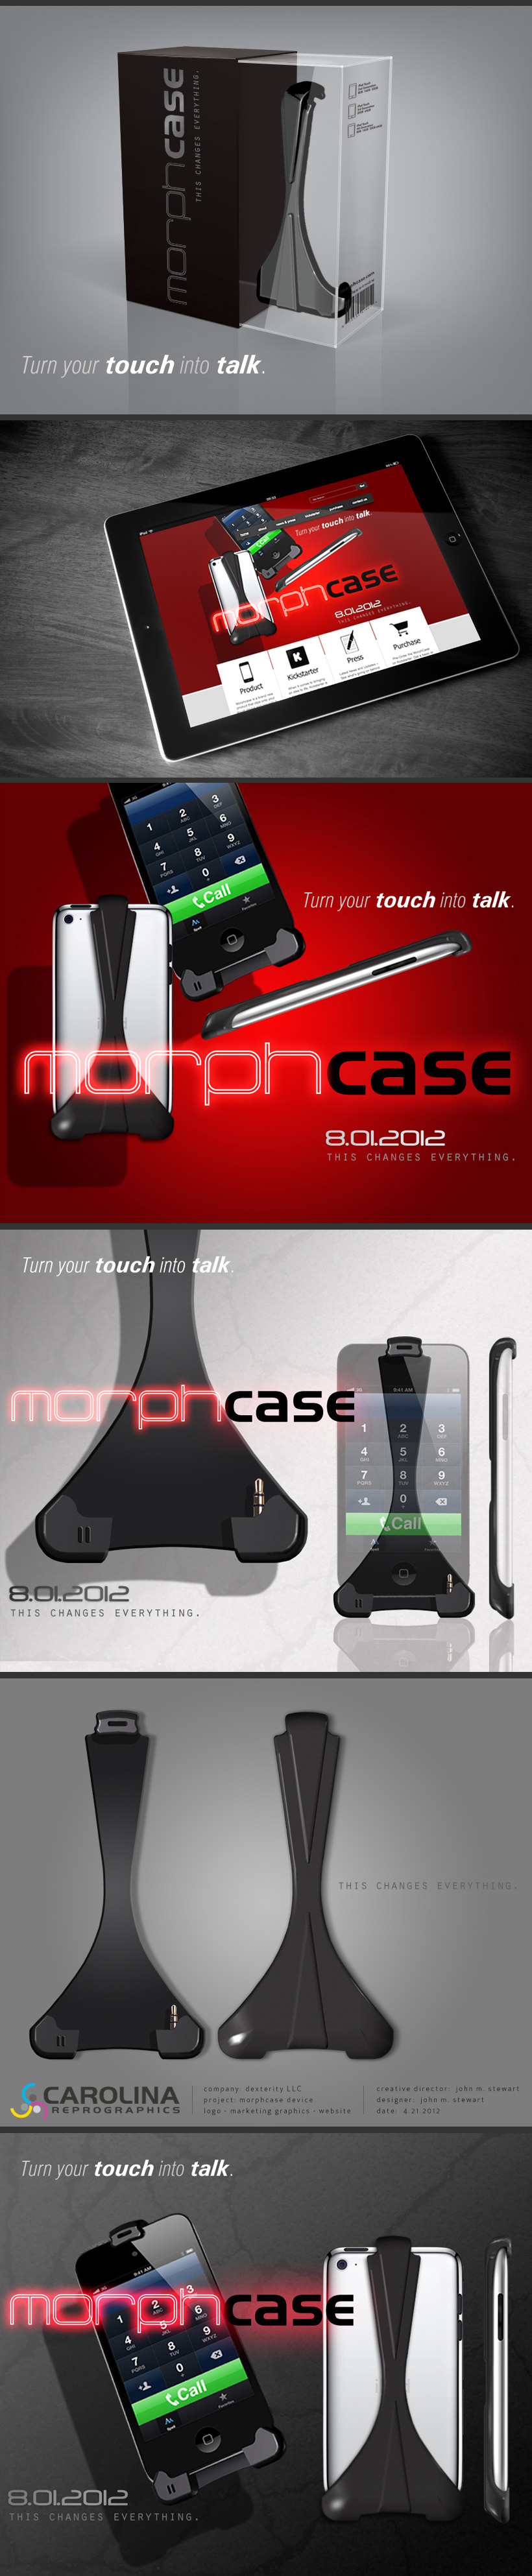 morphcase phone case Layout design Layout Design Web Website Design package desing Technology corporate Small Business concept design rendering